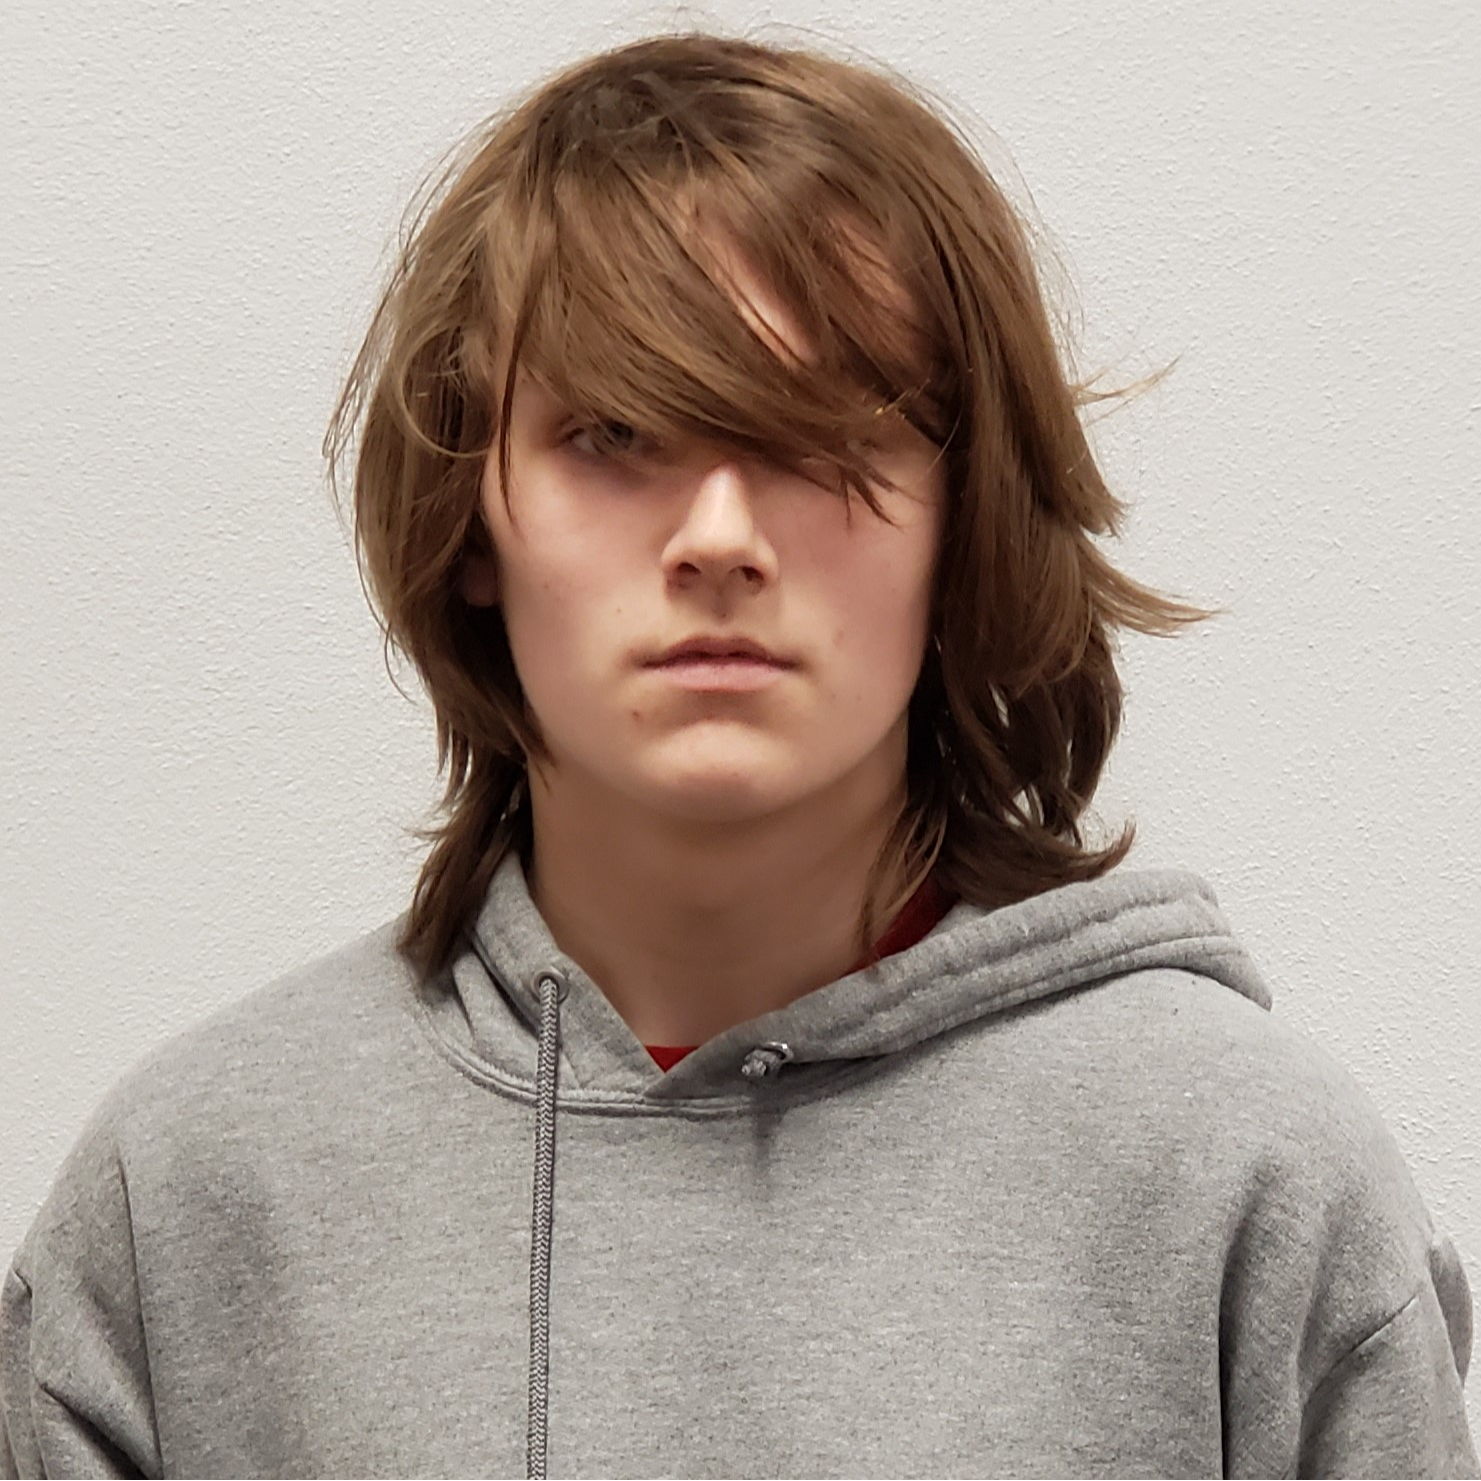 young man with messy brown hair across his face wearing a gray hoodie